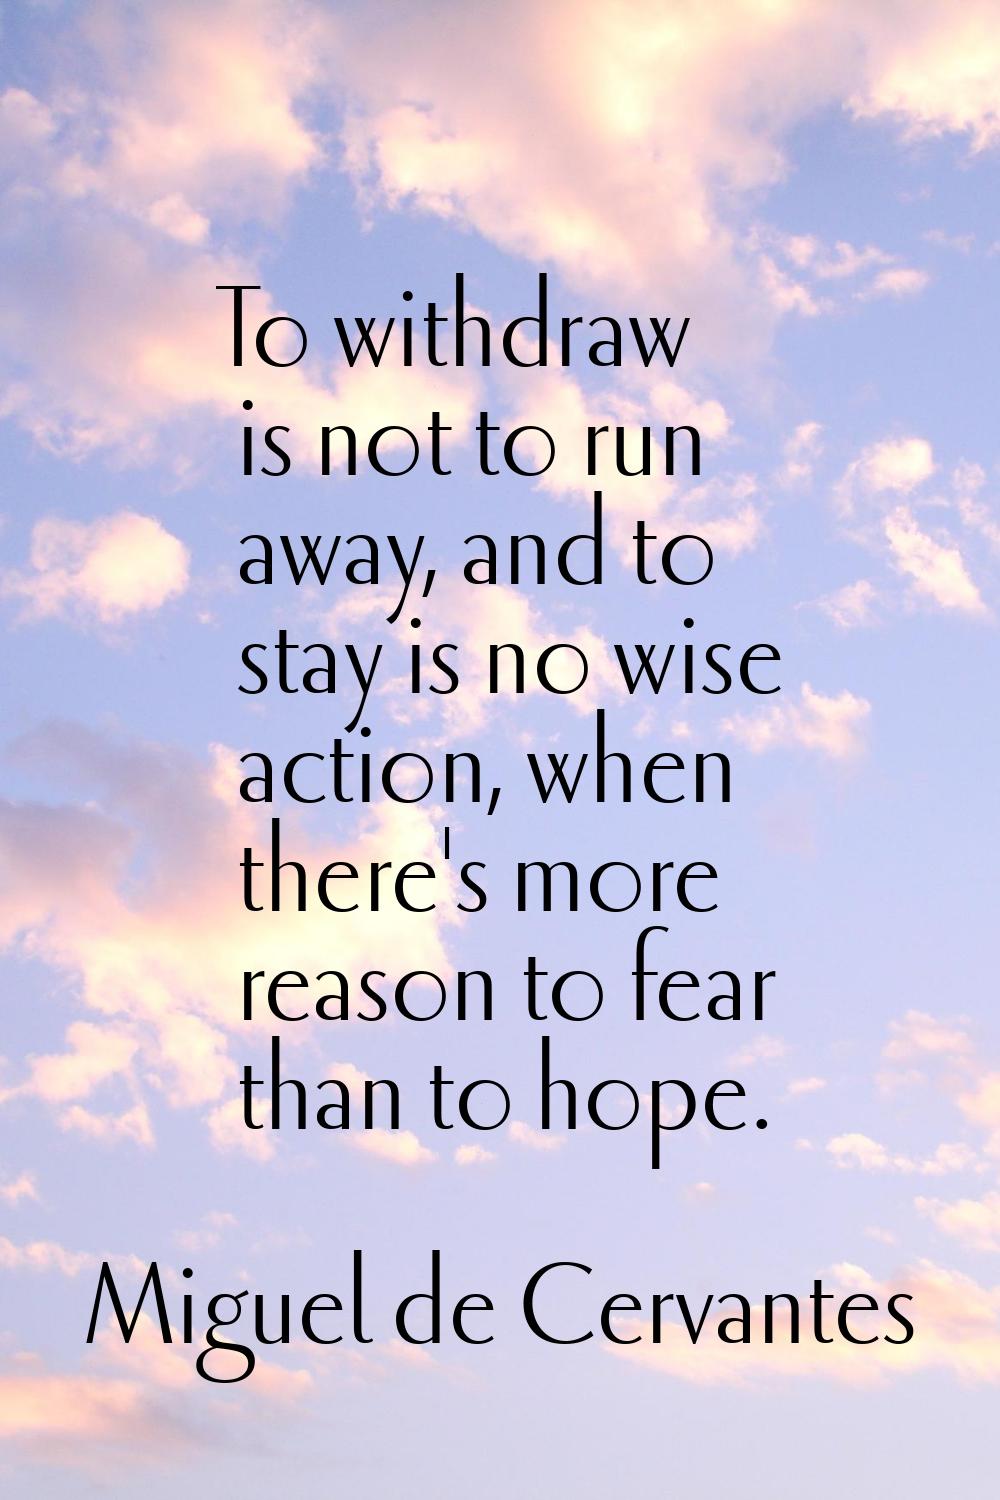 To withdraw is not to run away, and to stay is no wise action, when there's more reason to fear tha